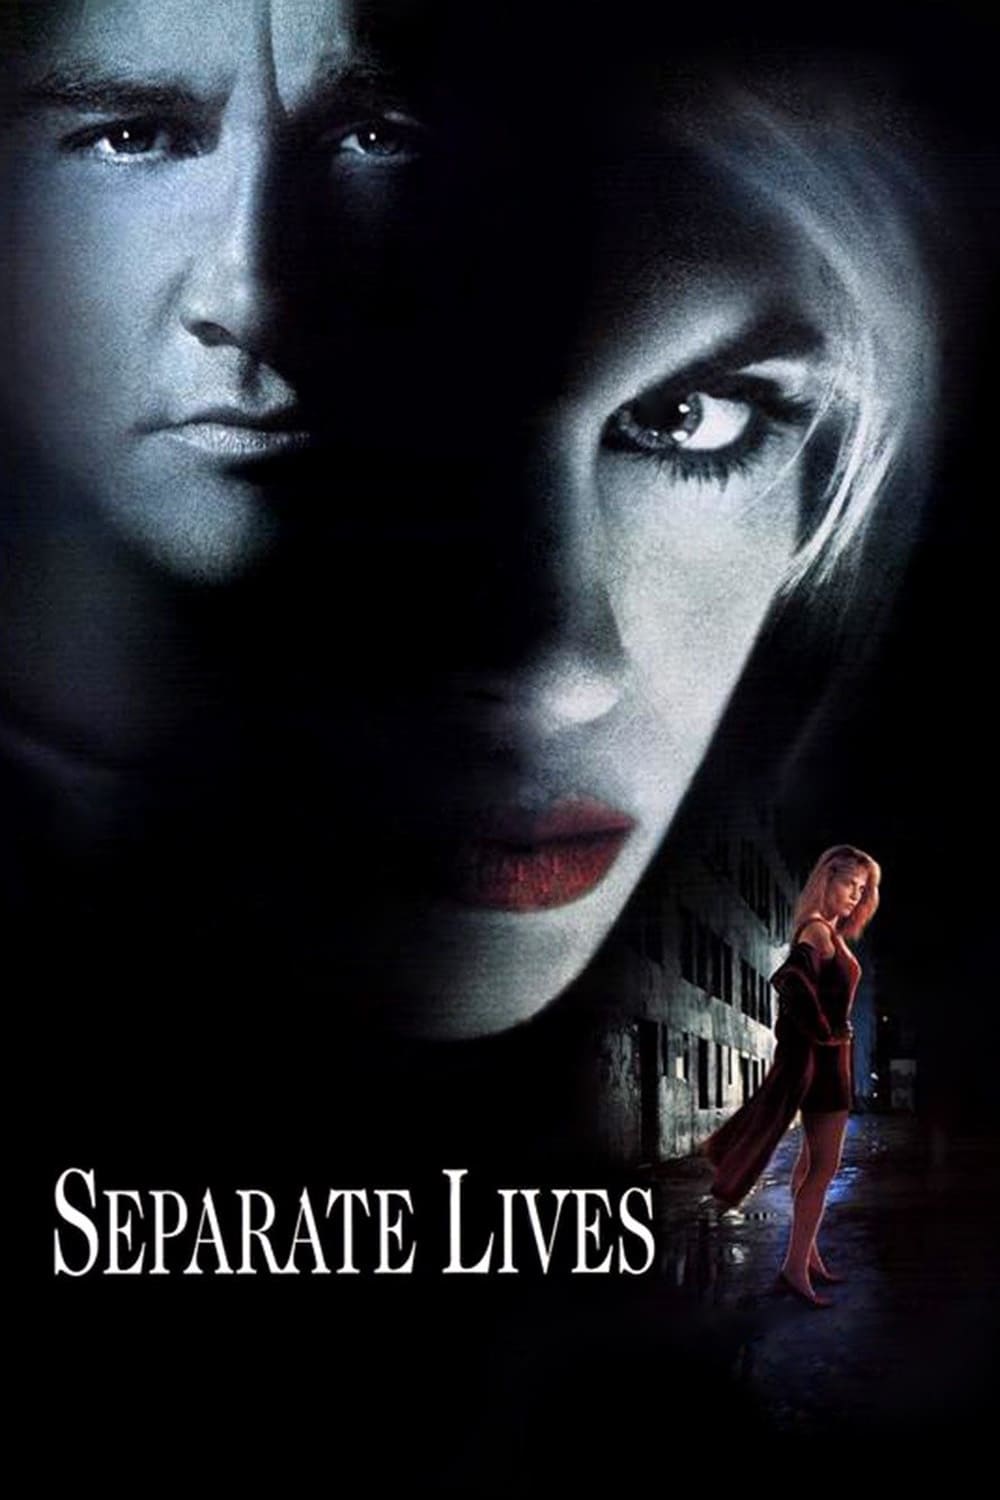 Separate Lives (1995)